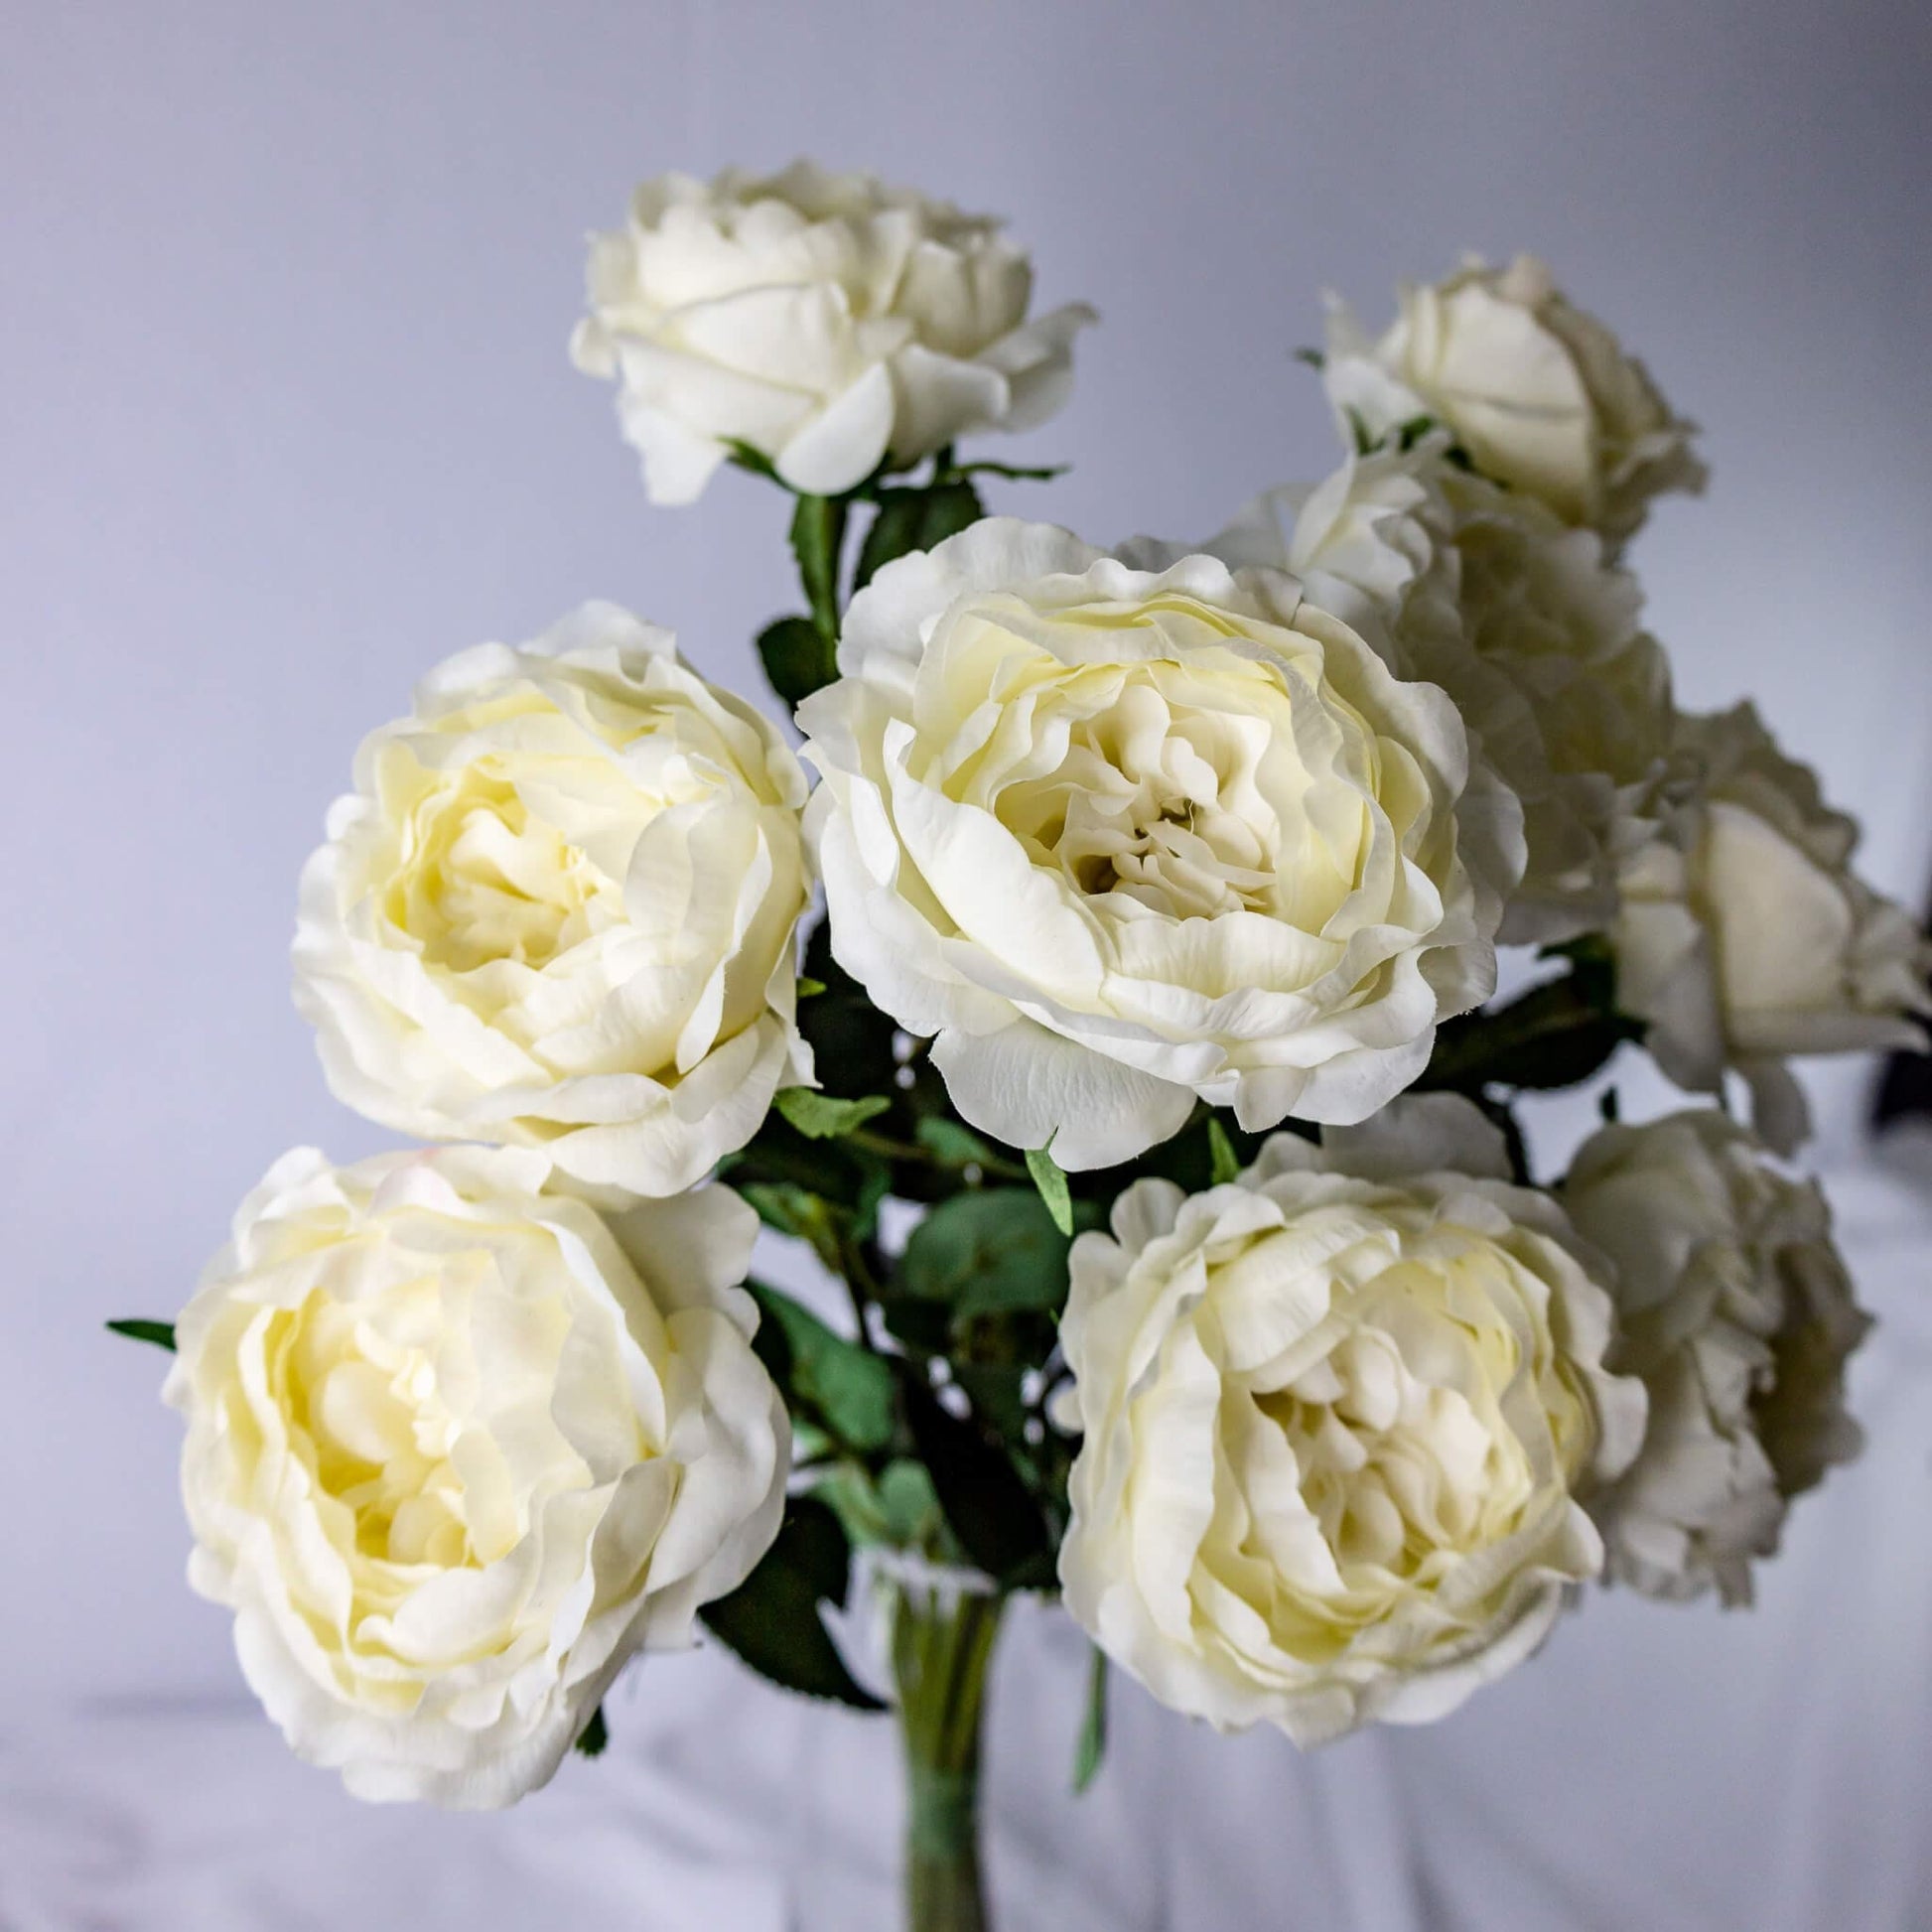 artificial Bridal White David Austin Real Touch Half Bloom Roses closer look